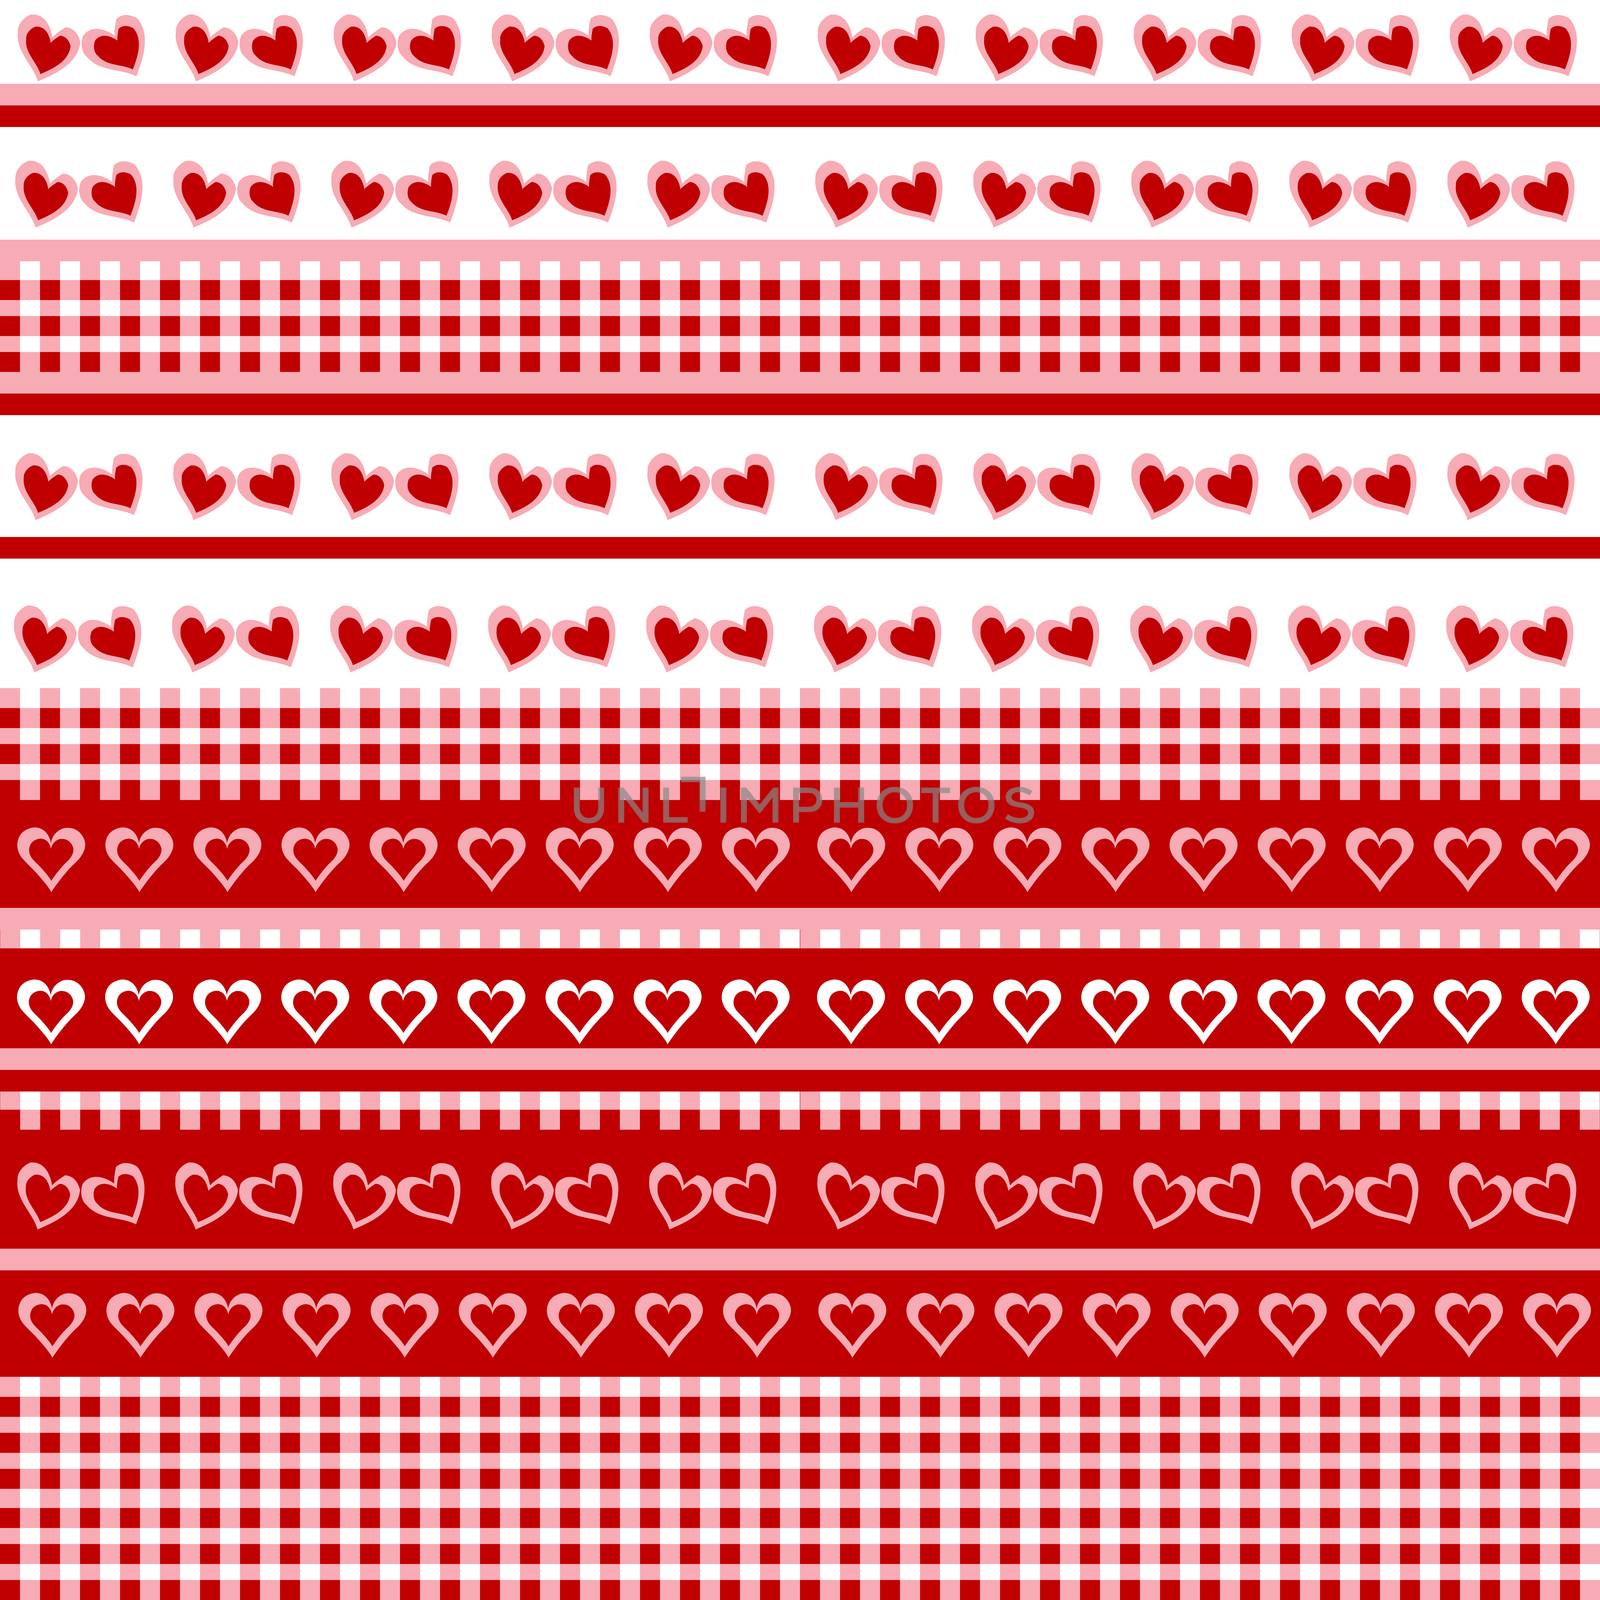 Seamless background with hearts and tablecloth by hibrida13